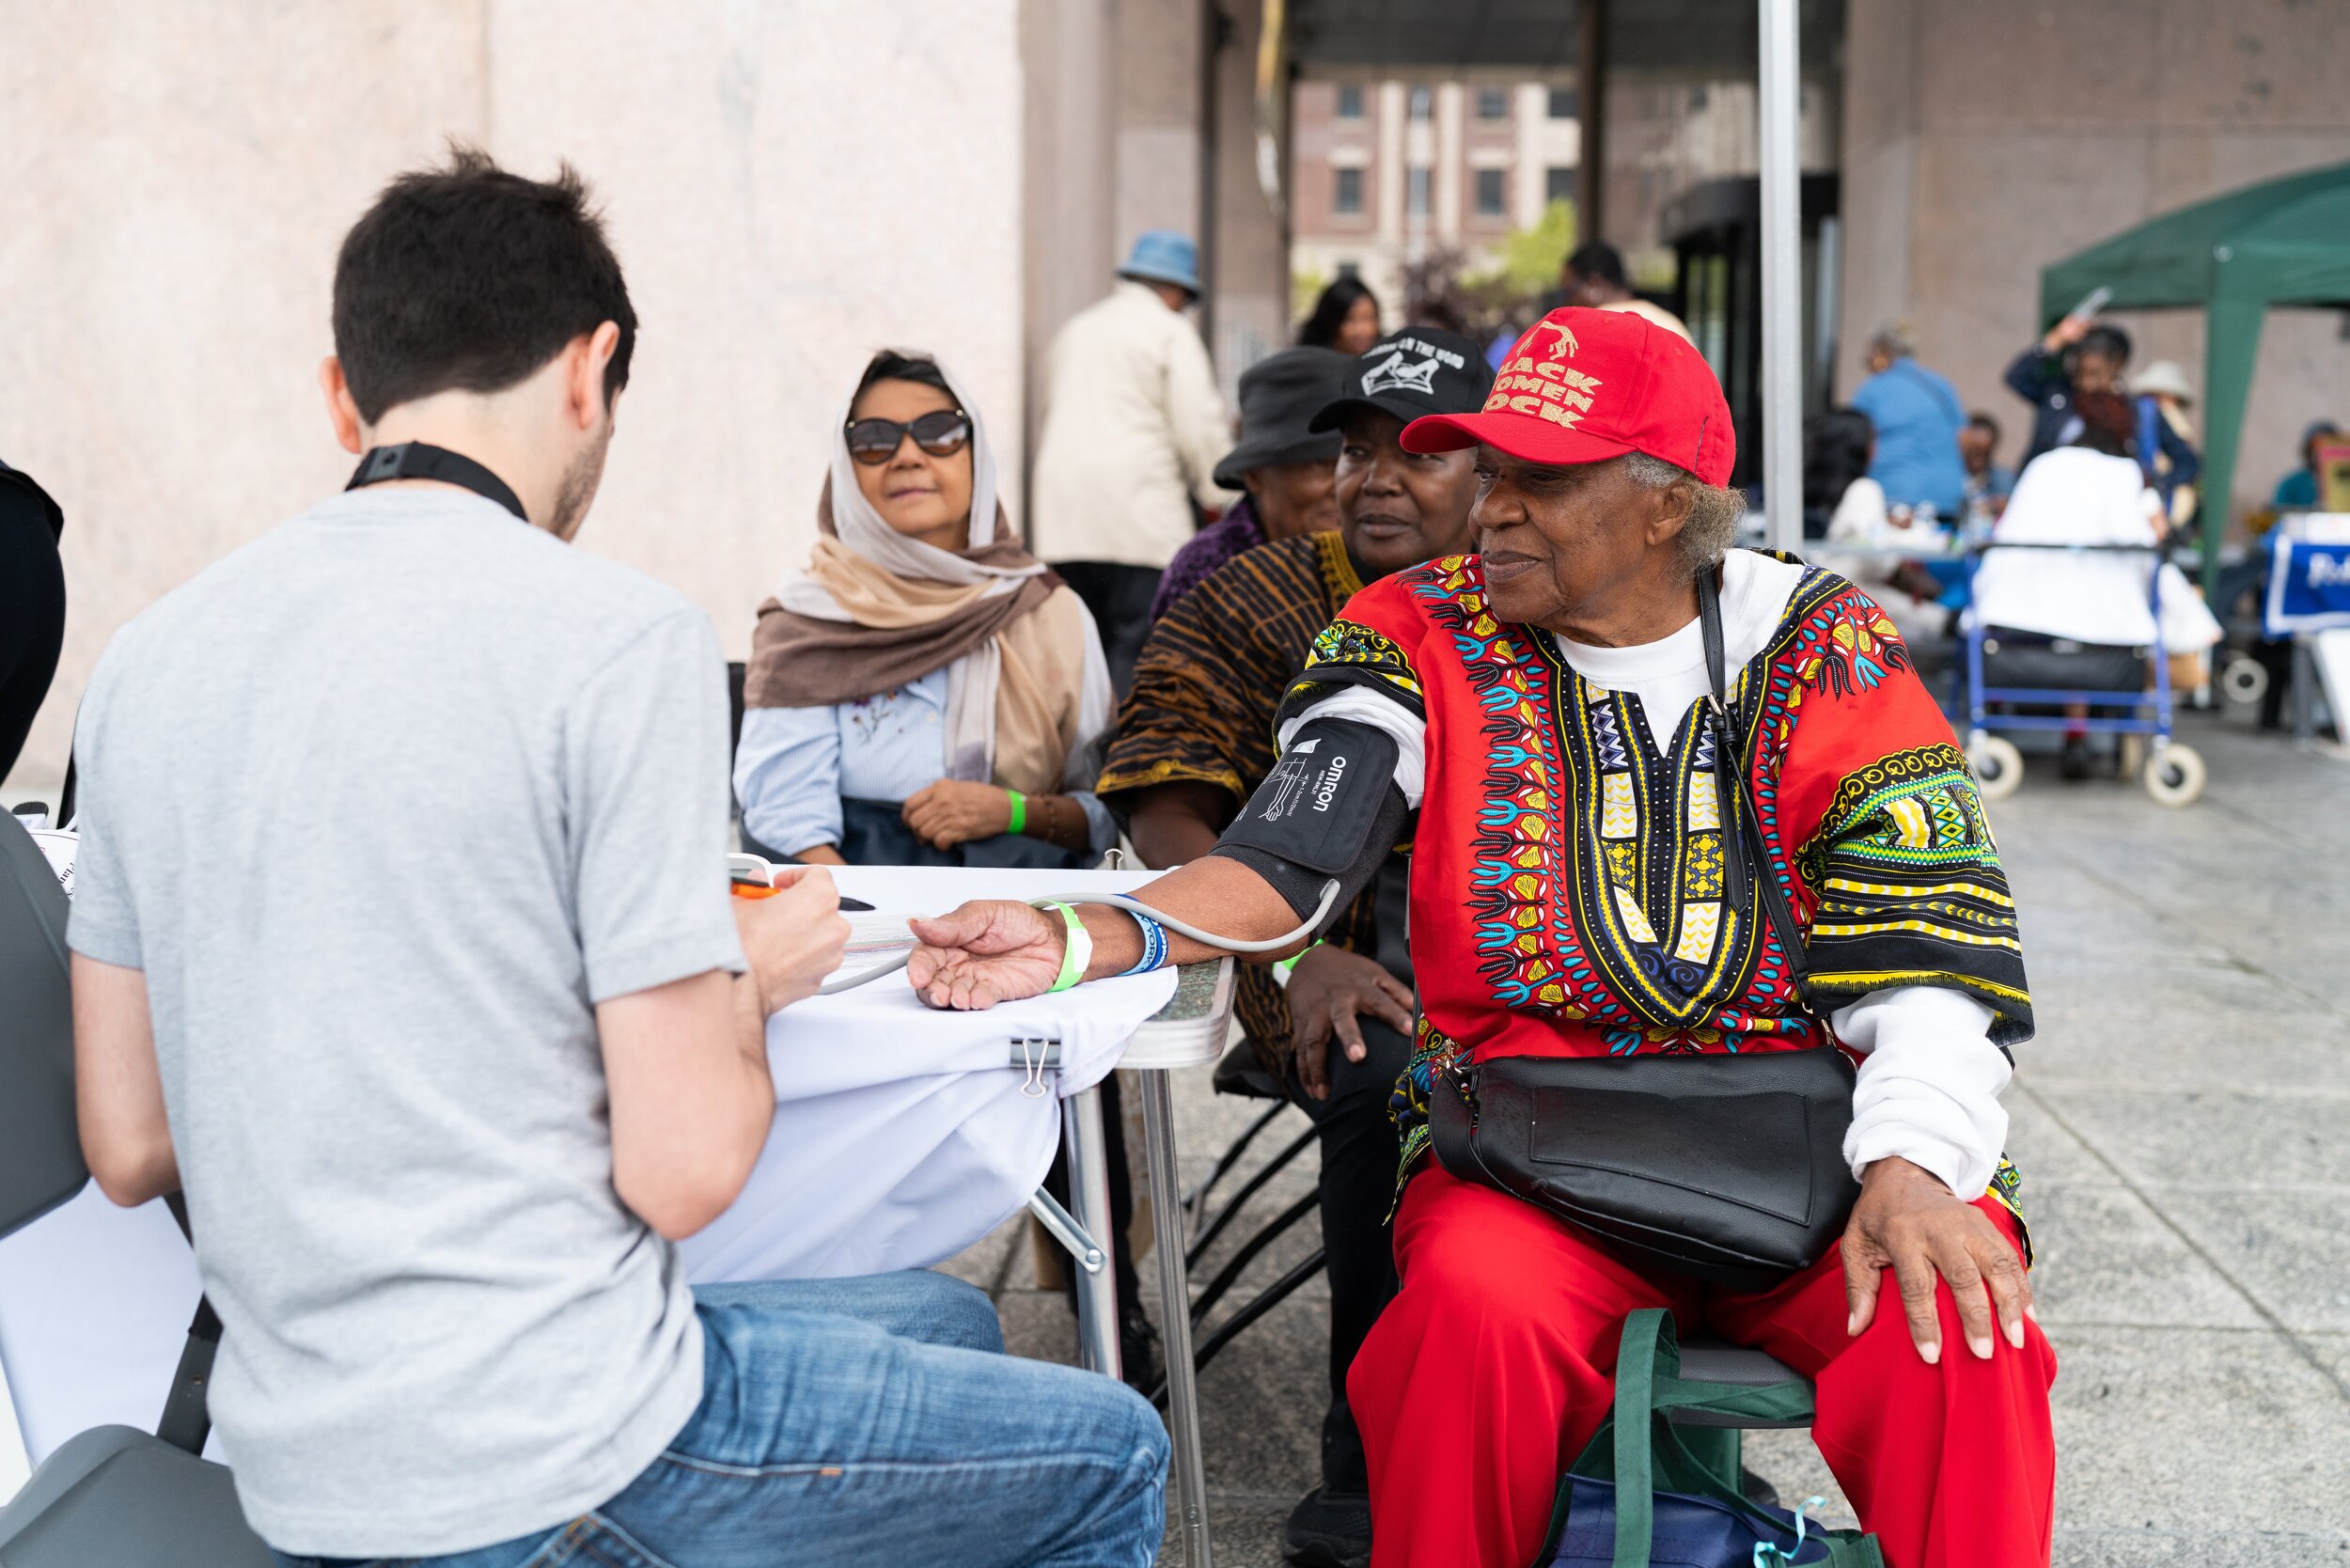   Carol Turneo, 90, gets a free blood pressure screening at Wednesday's Senior Day in Harlem.  